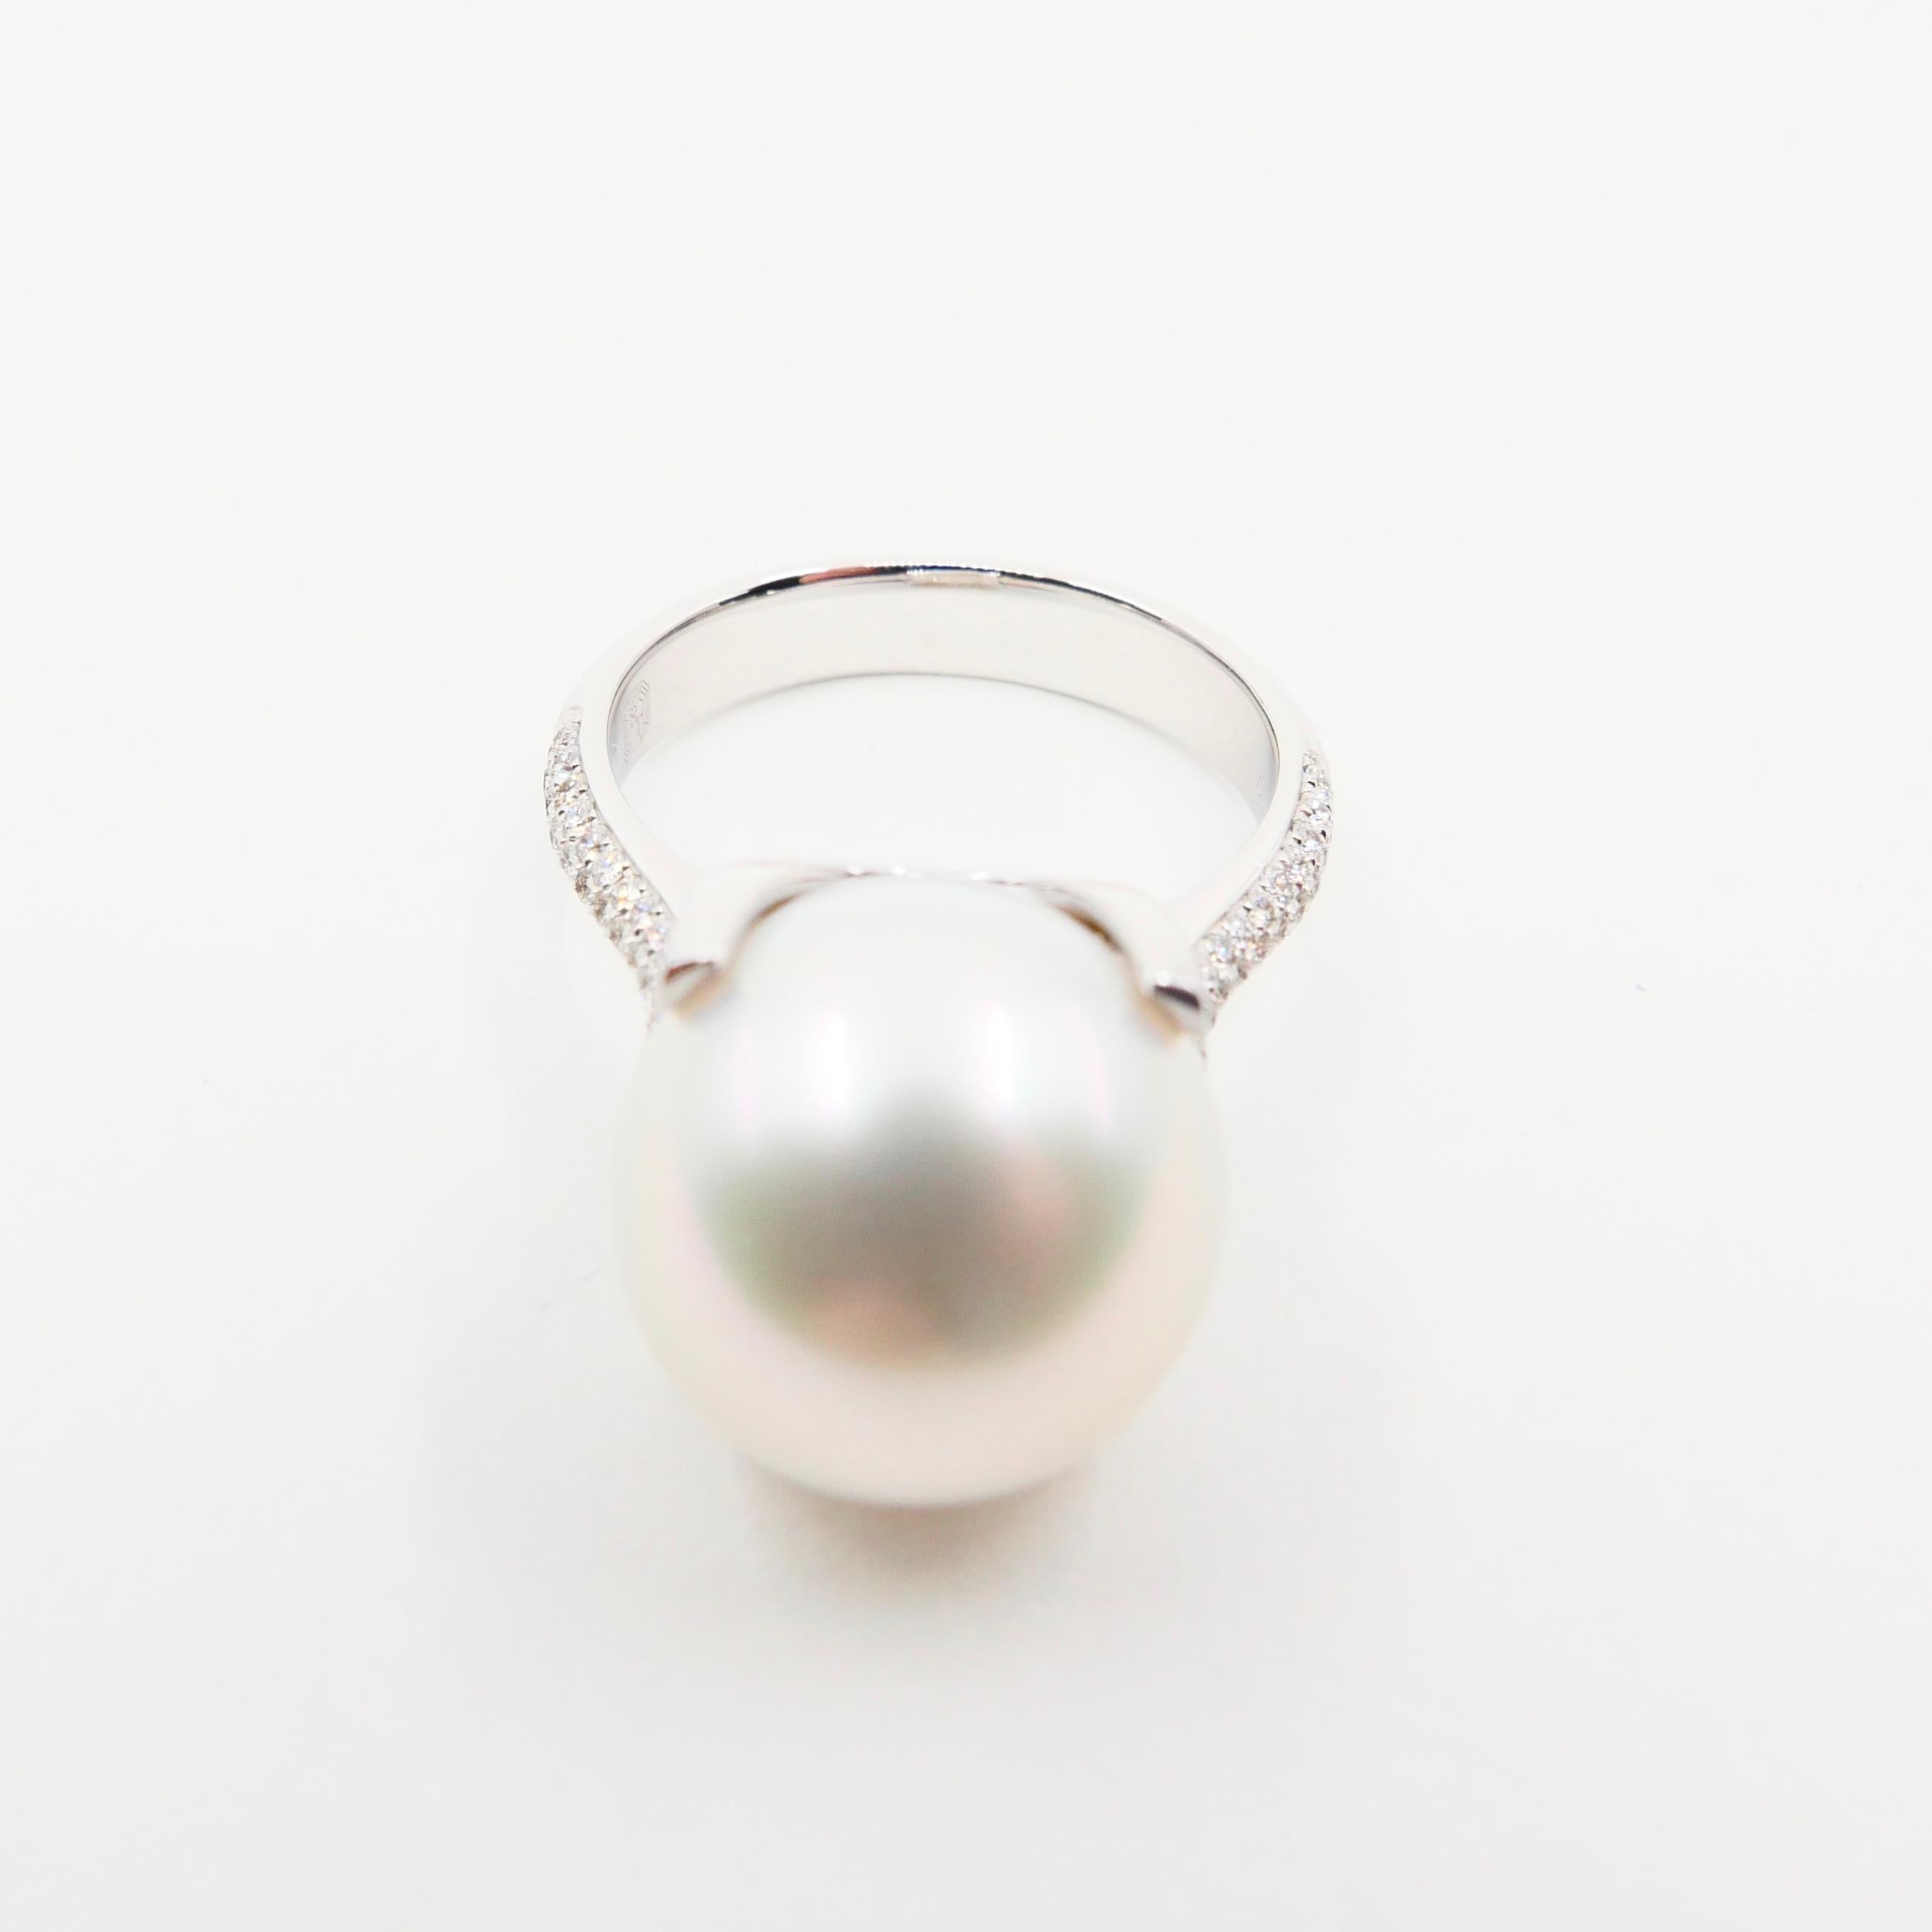 Certified South Sea Pearl and Diamond Ring, Our Signature Design 5